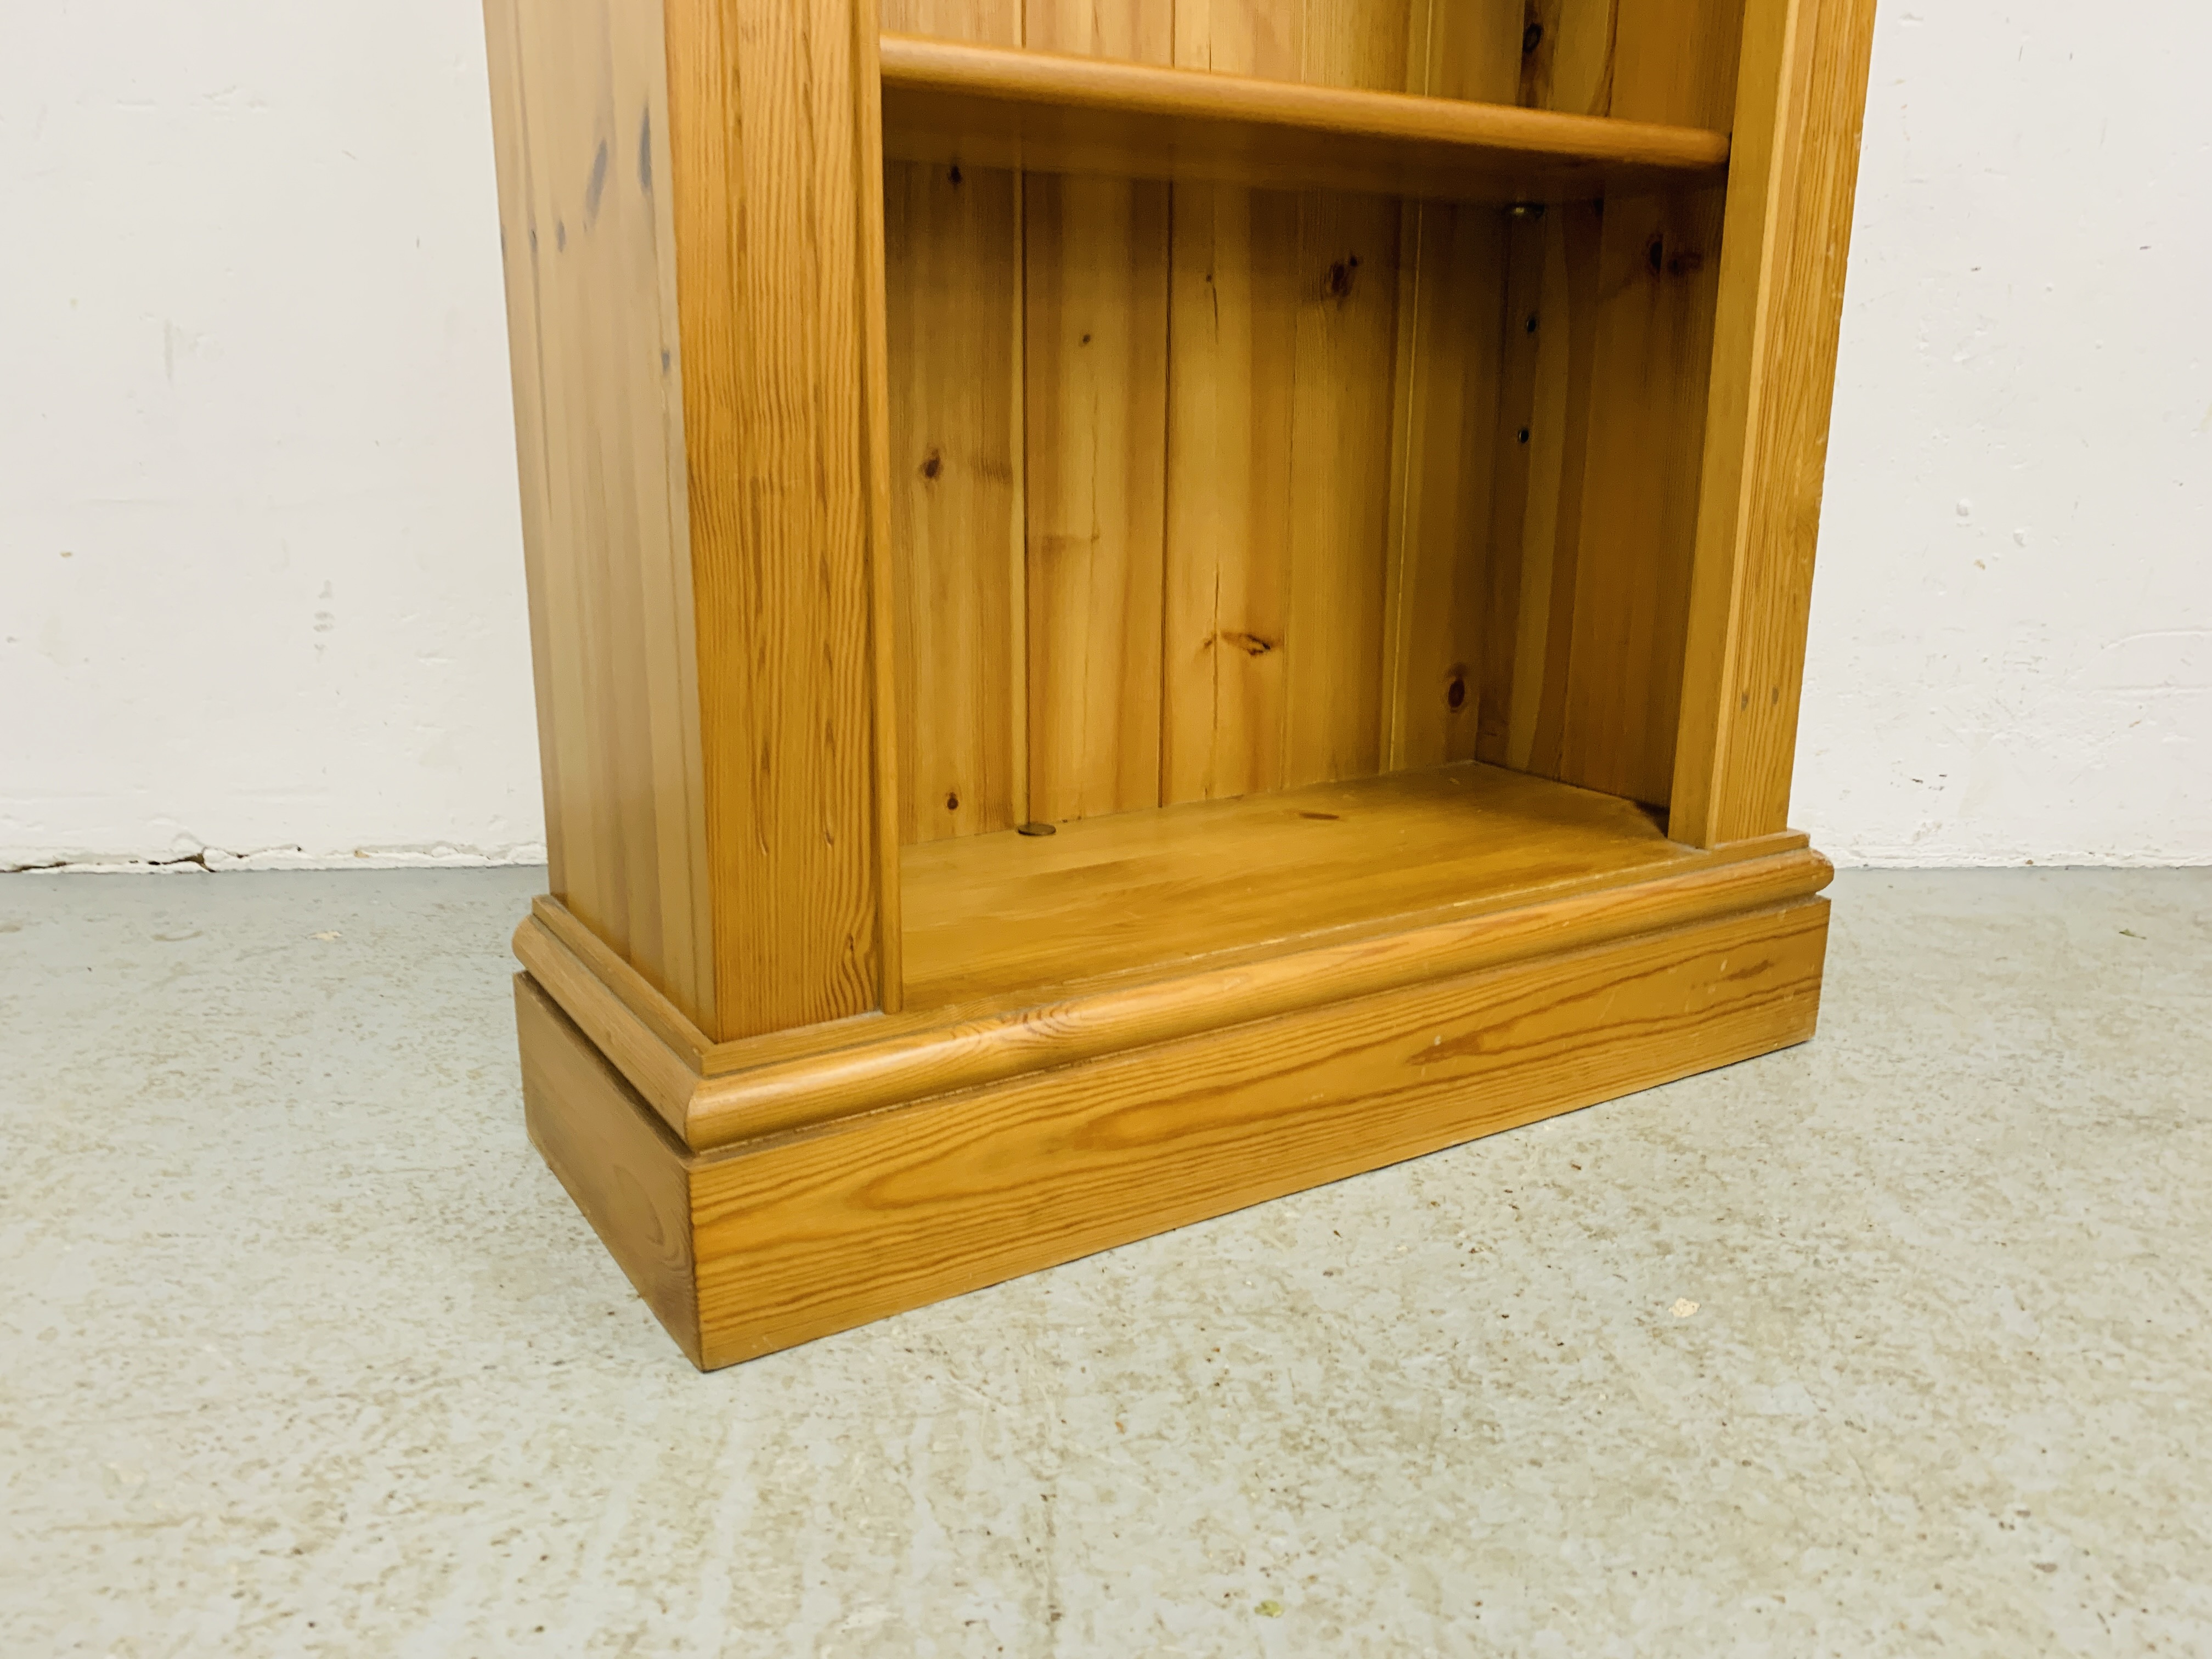 A SOLID HONEY PINE BOOKSHELF WITH TONGUE AND GROOVE BOARDED BACK - W 66CM. D 26CM. H 107CM. - Image 5 of 8